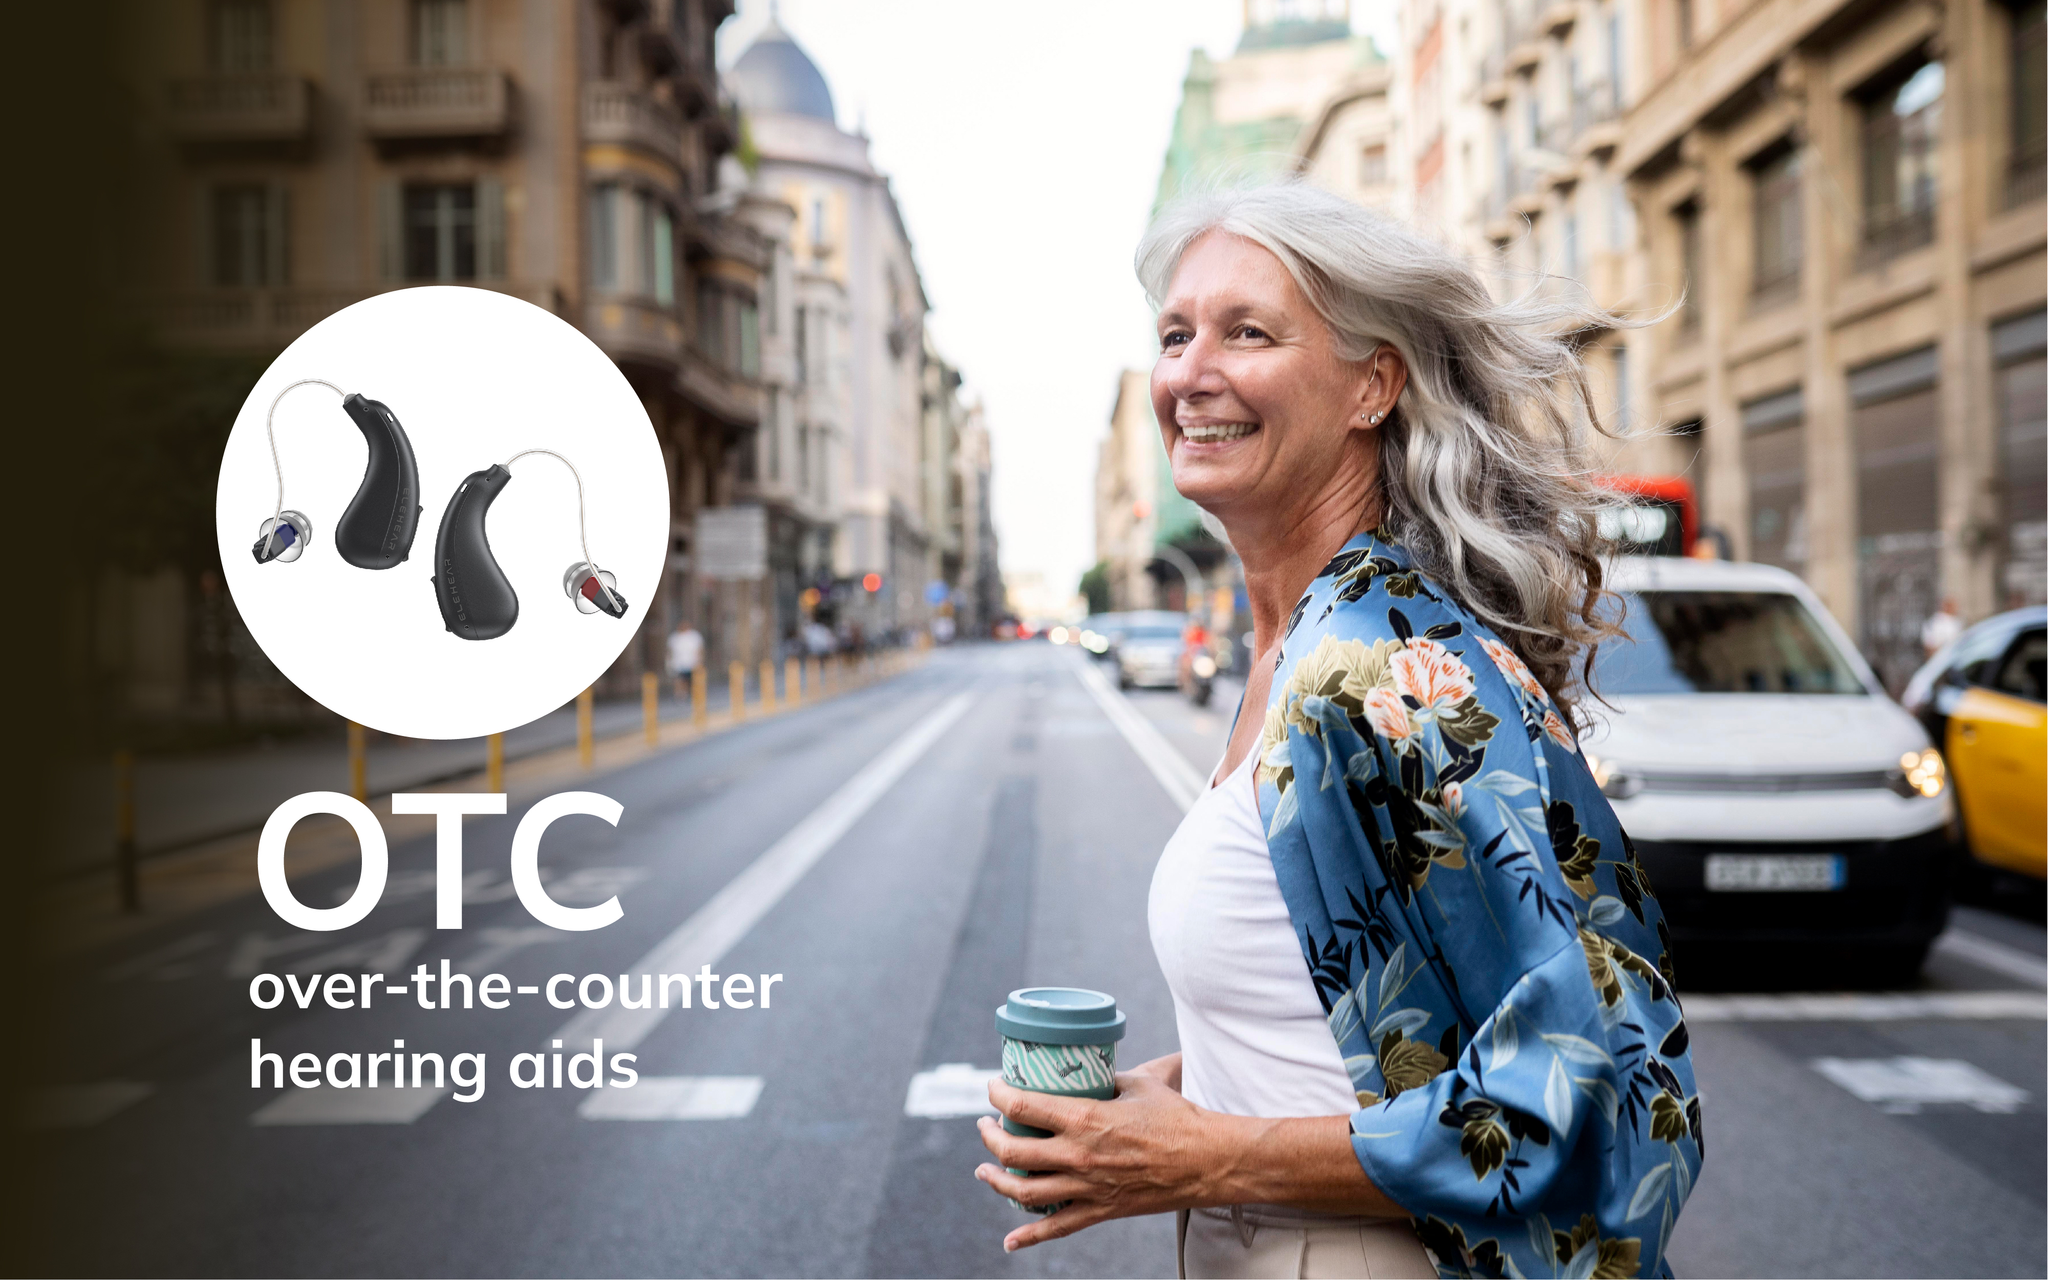 How Much Can You Save On Hearing Aids When You Get Over-The-Counter (OTC) Hearing Aids